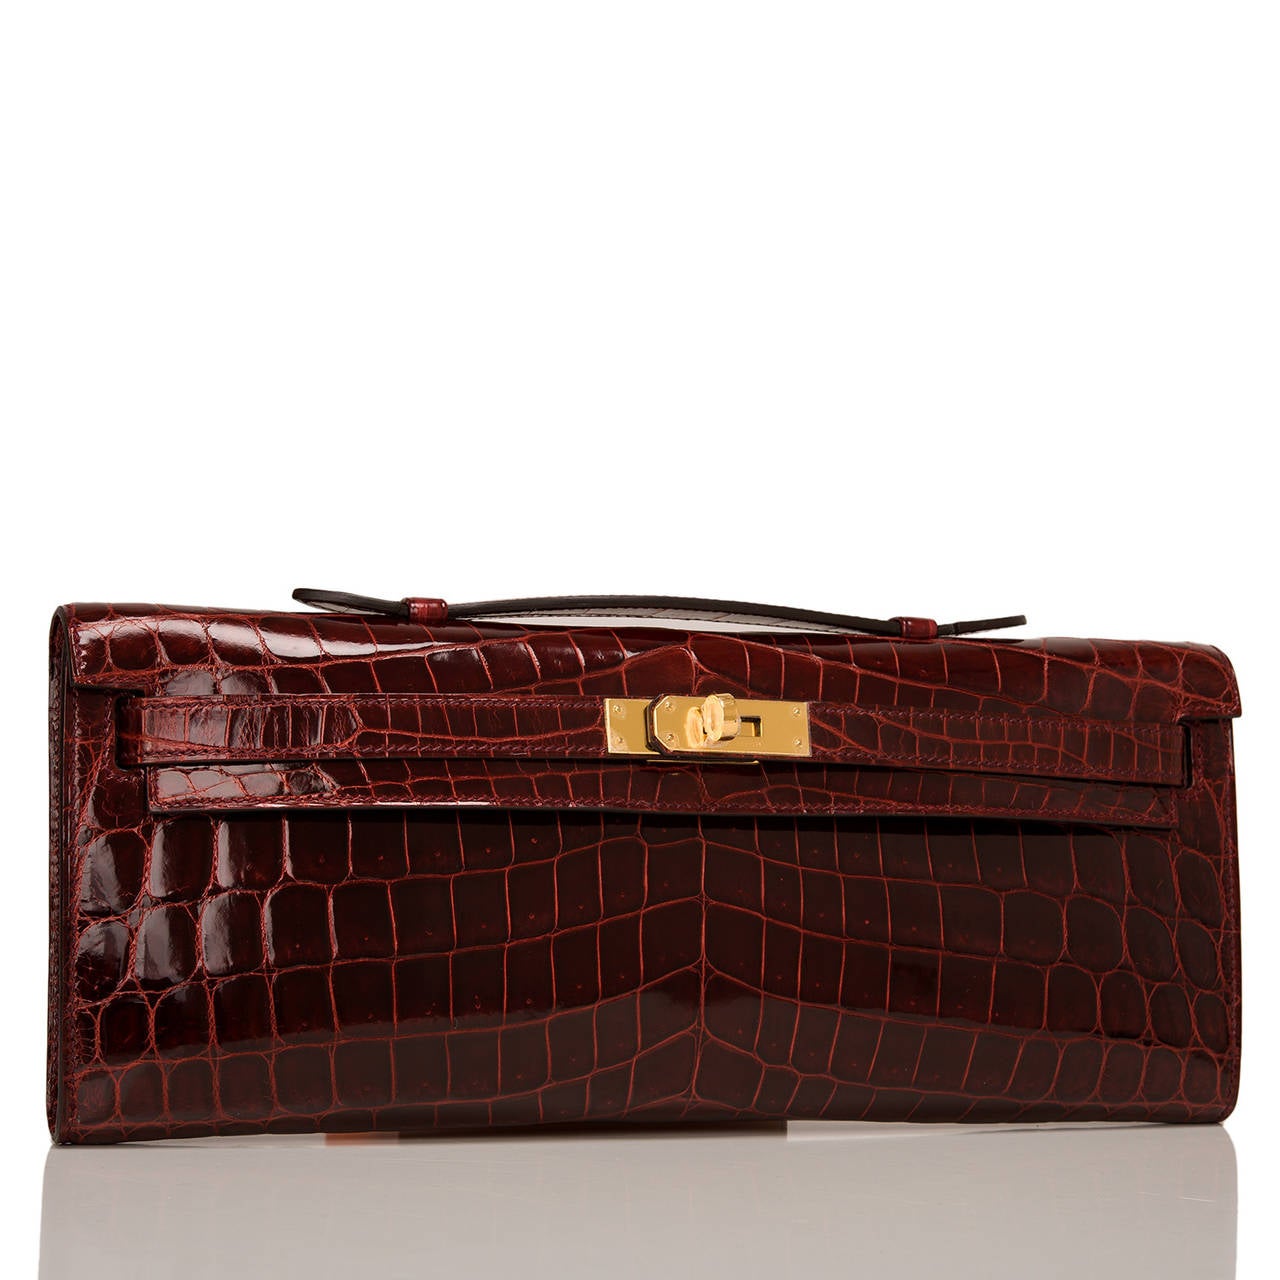 Hermes Bordeaux shiny niloticus crocodile Kelly Cut

This Kelly Cut in a fall 2015 favorite color -- Bordeaux -- is a gorgeous deep burgundy that is elegant with rare Nilo crocodile skin and gold hardware; the bag has tonal stitching, front straps